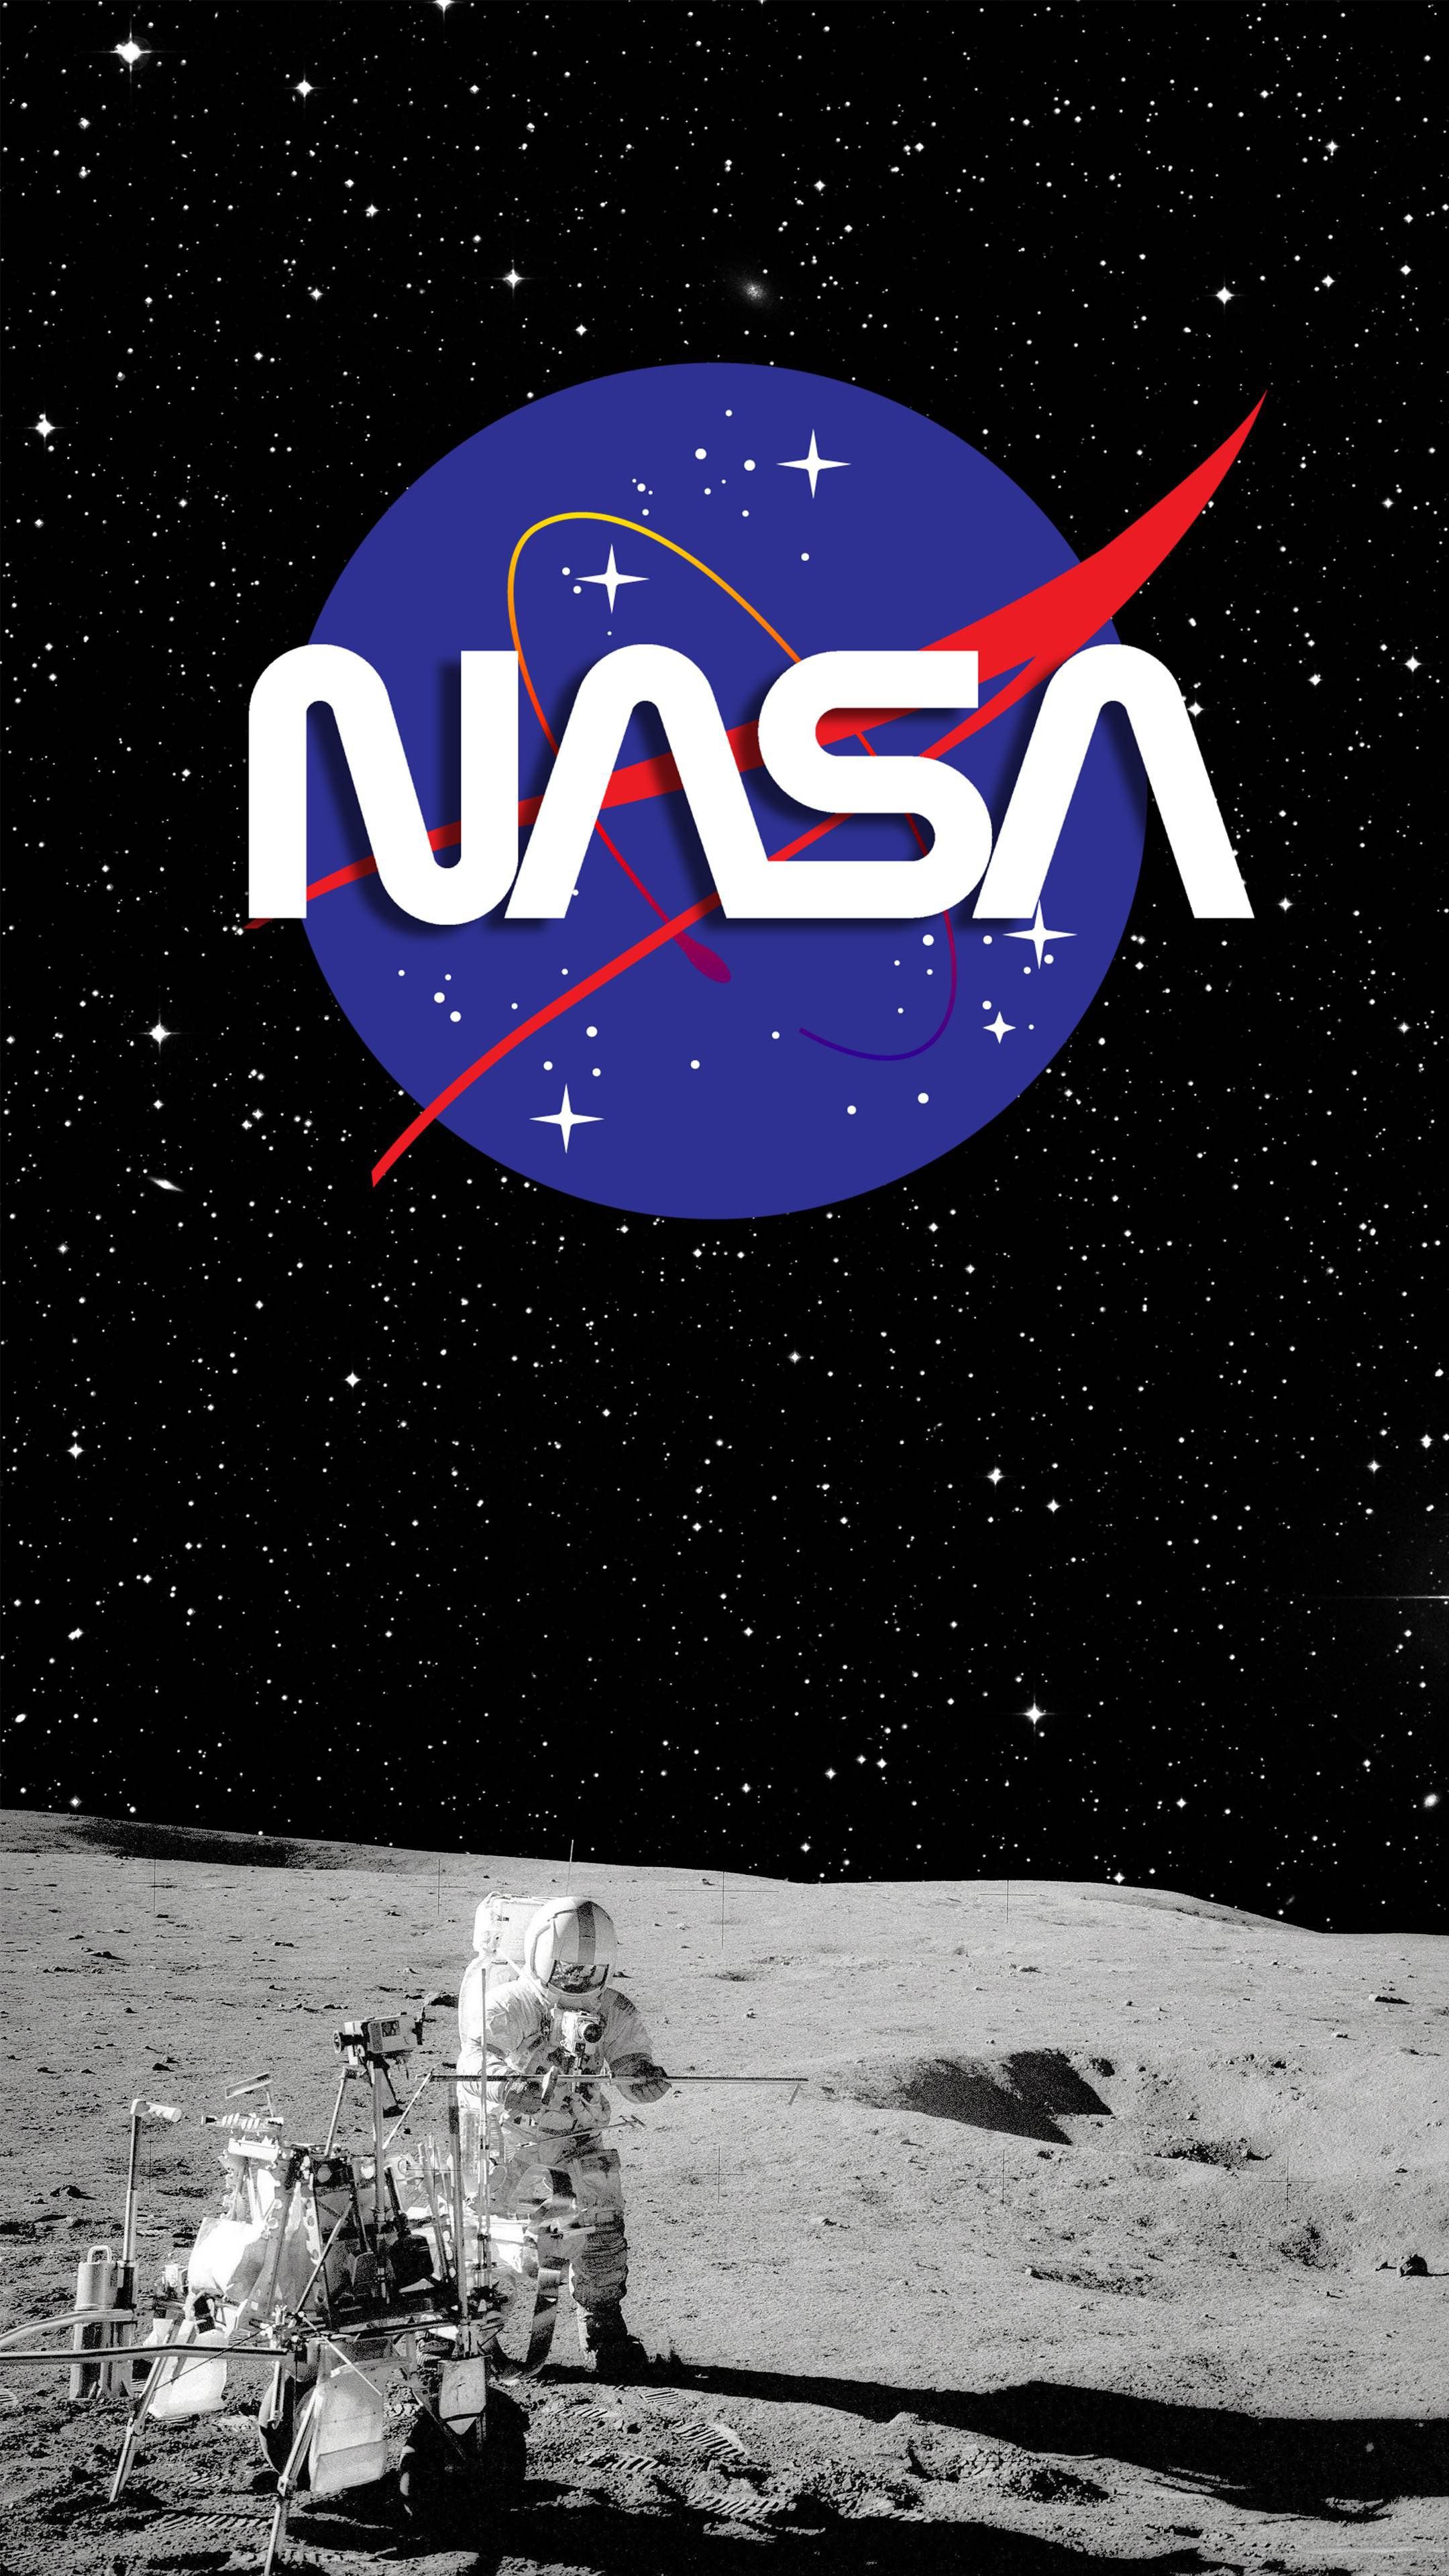 A NASA retro wallpaper assembled from a variety of sources